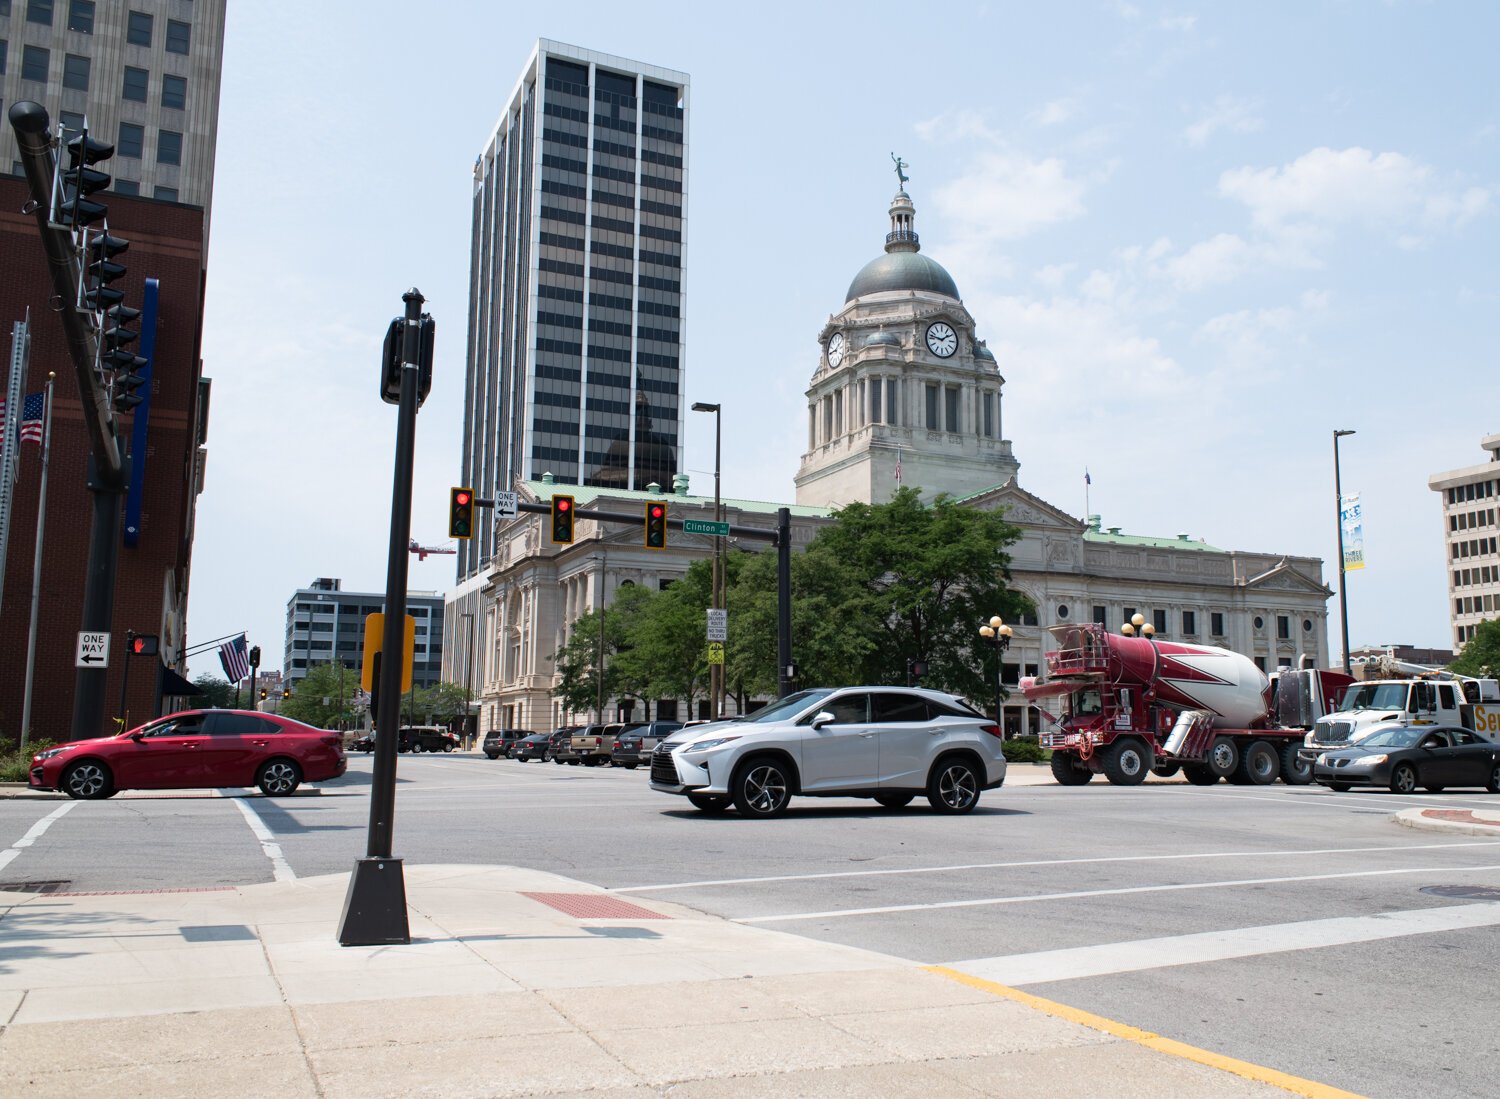 In many ways, Fort Wayne is a city designed for cars and personal vehicles.